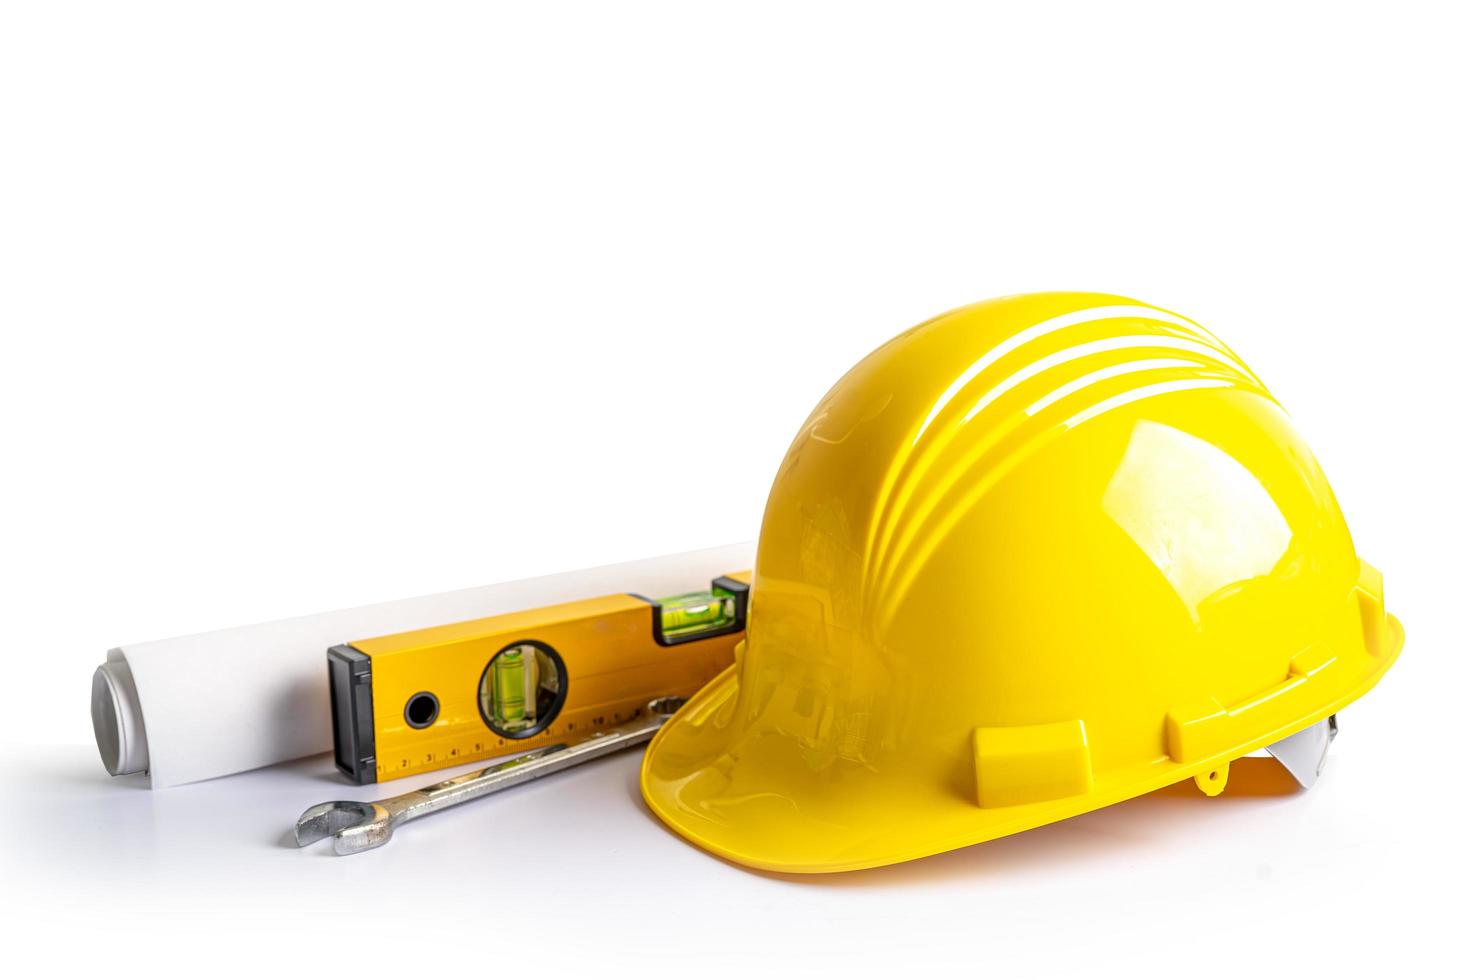 Construction helmet and tools for engineering work project on white background with clipping path. photo